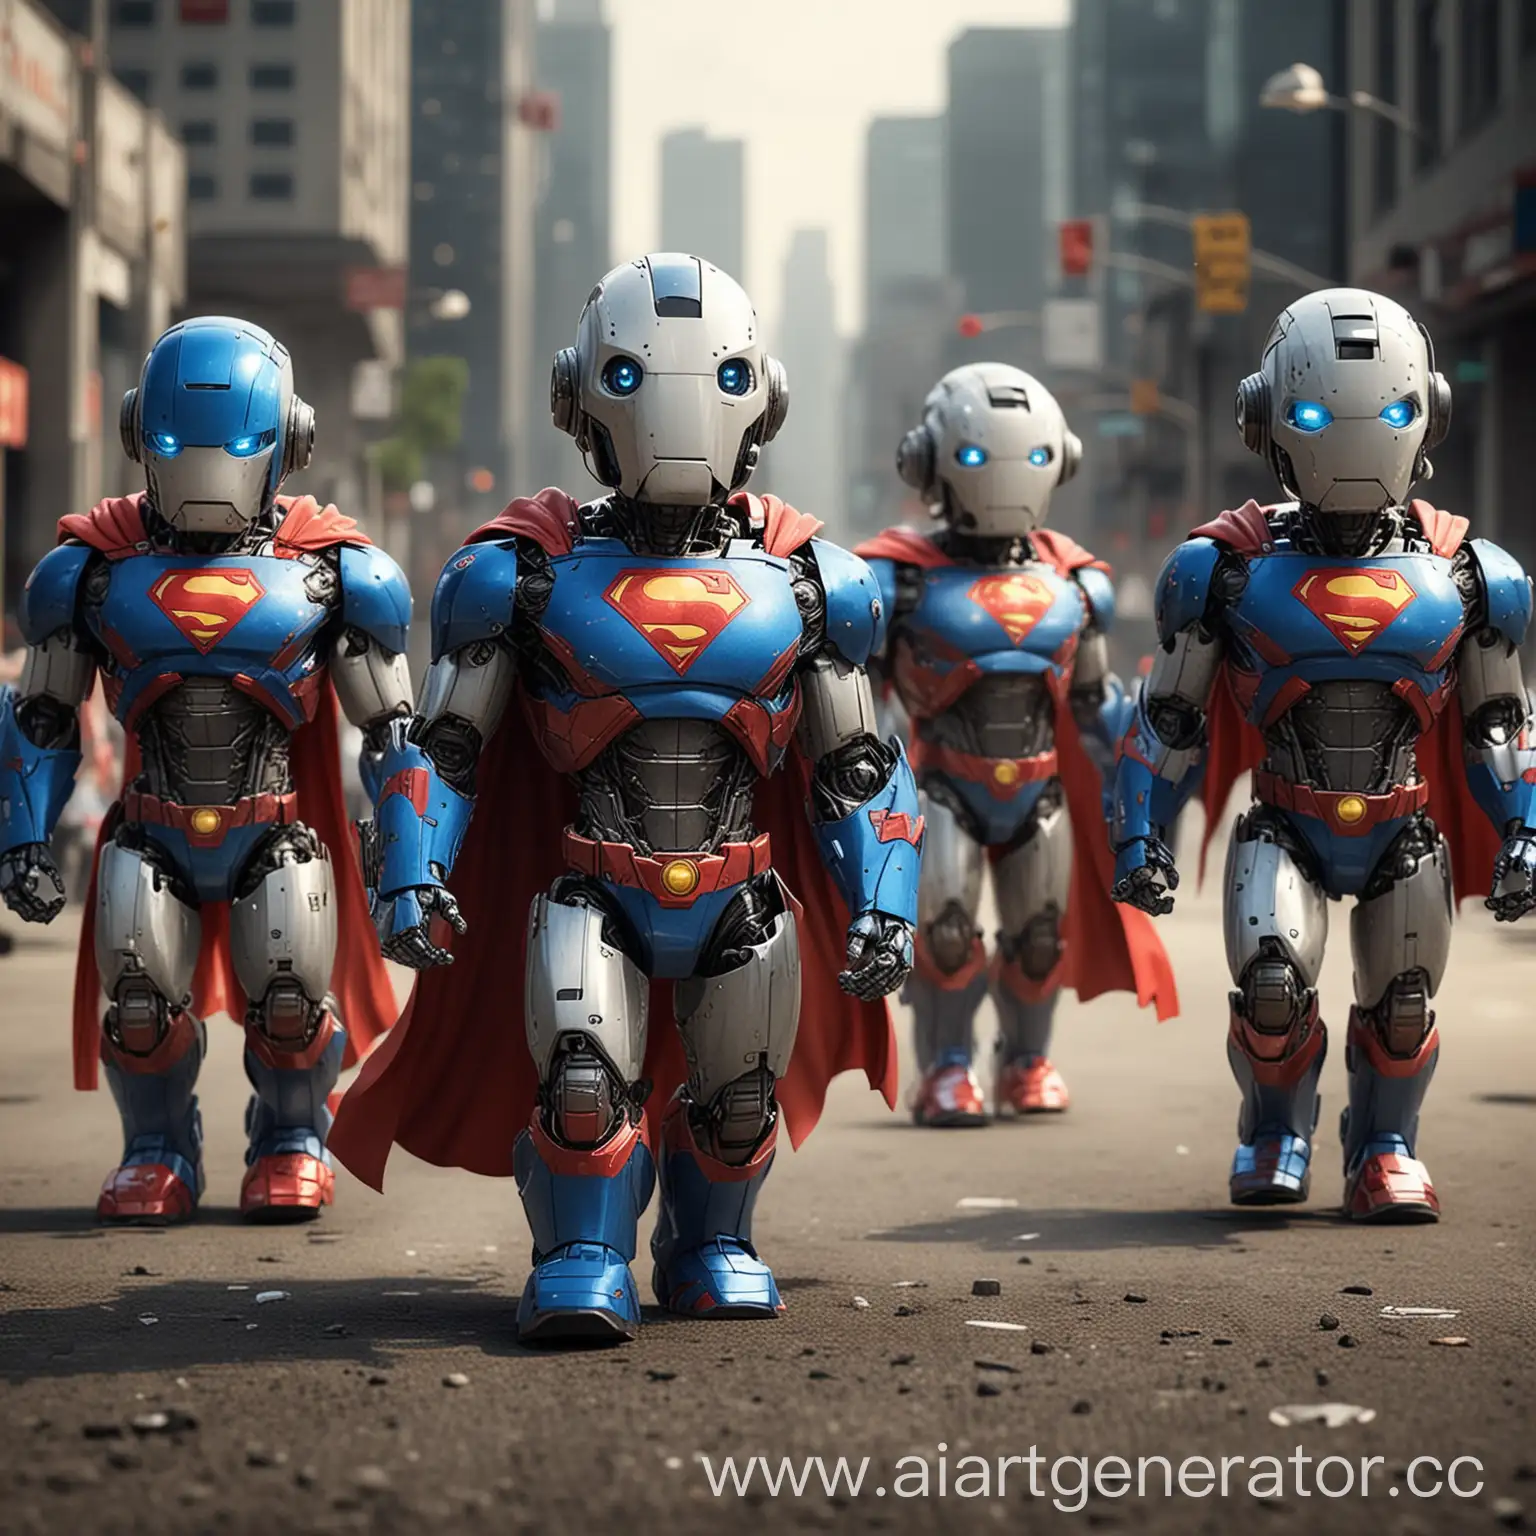 Cute-Robot-Commanders-in-Superman-Costumes-Leading-the-Charge